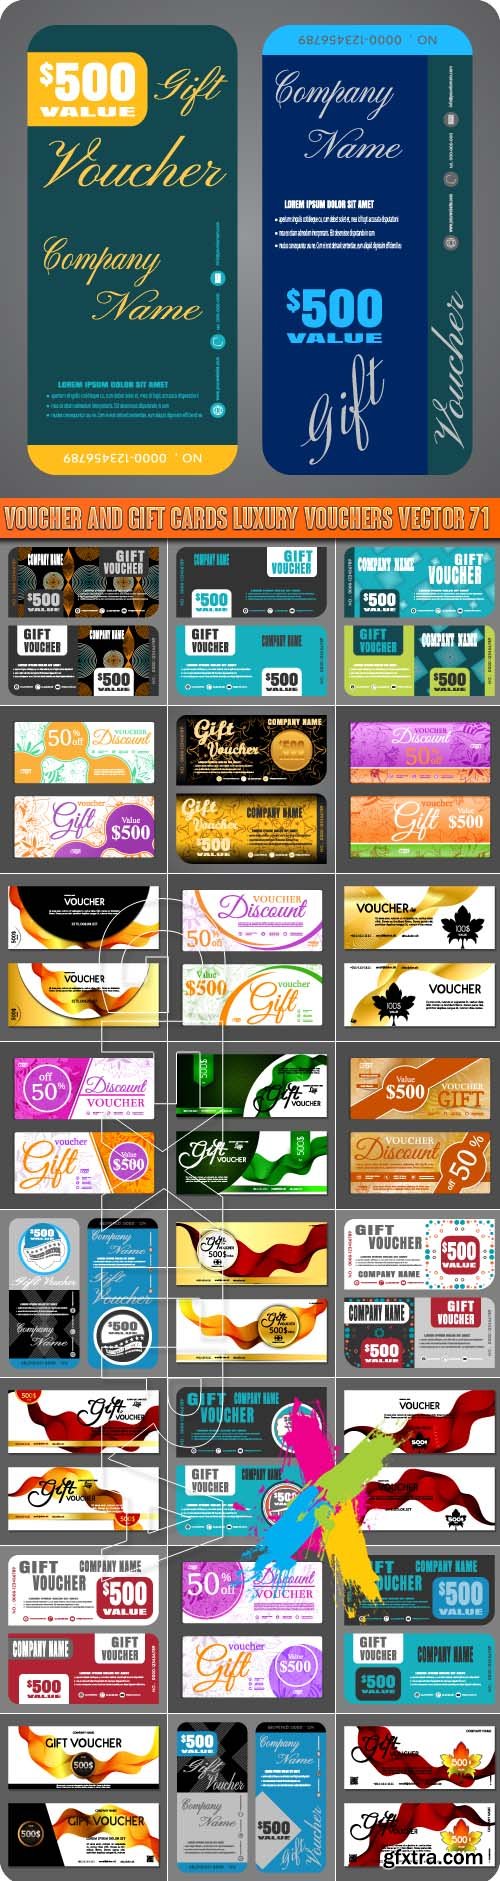 Voucher and gift cards luxury vouchers vector 71